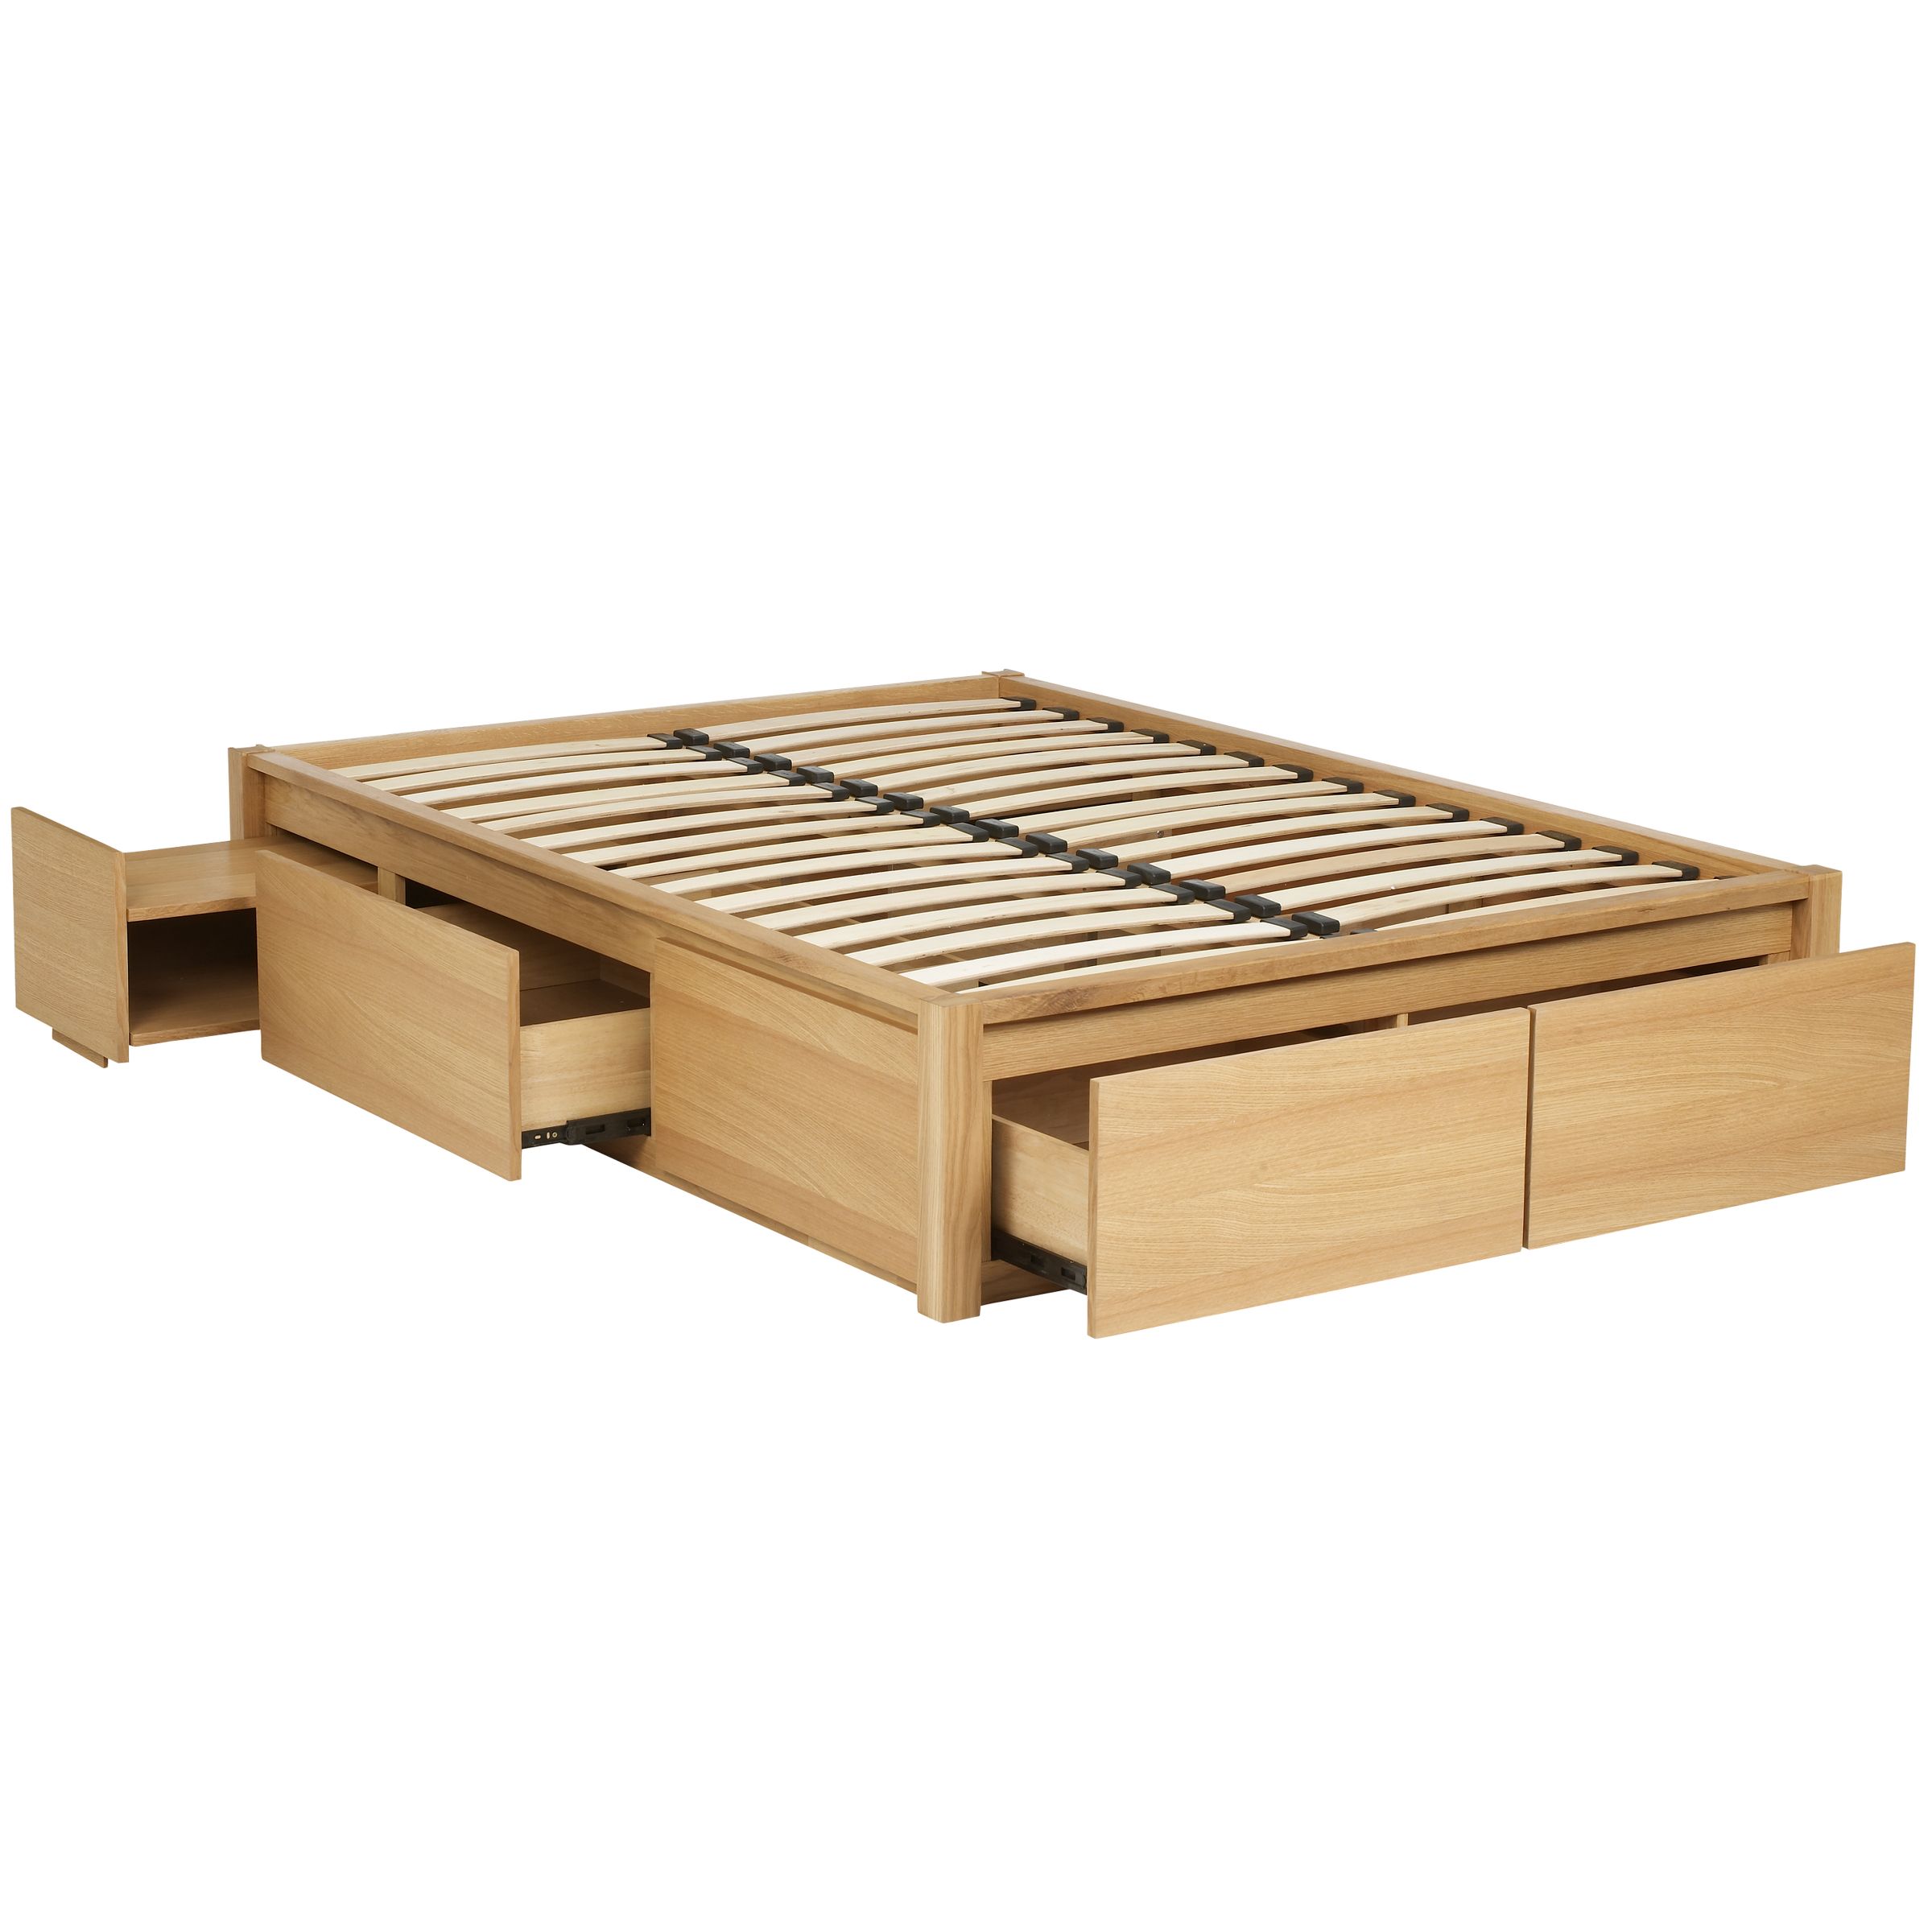 Platform Beds with Storage Drawers